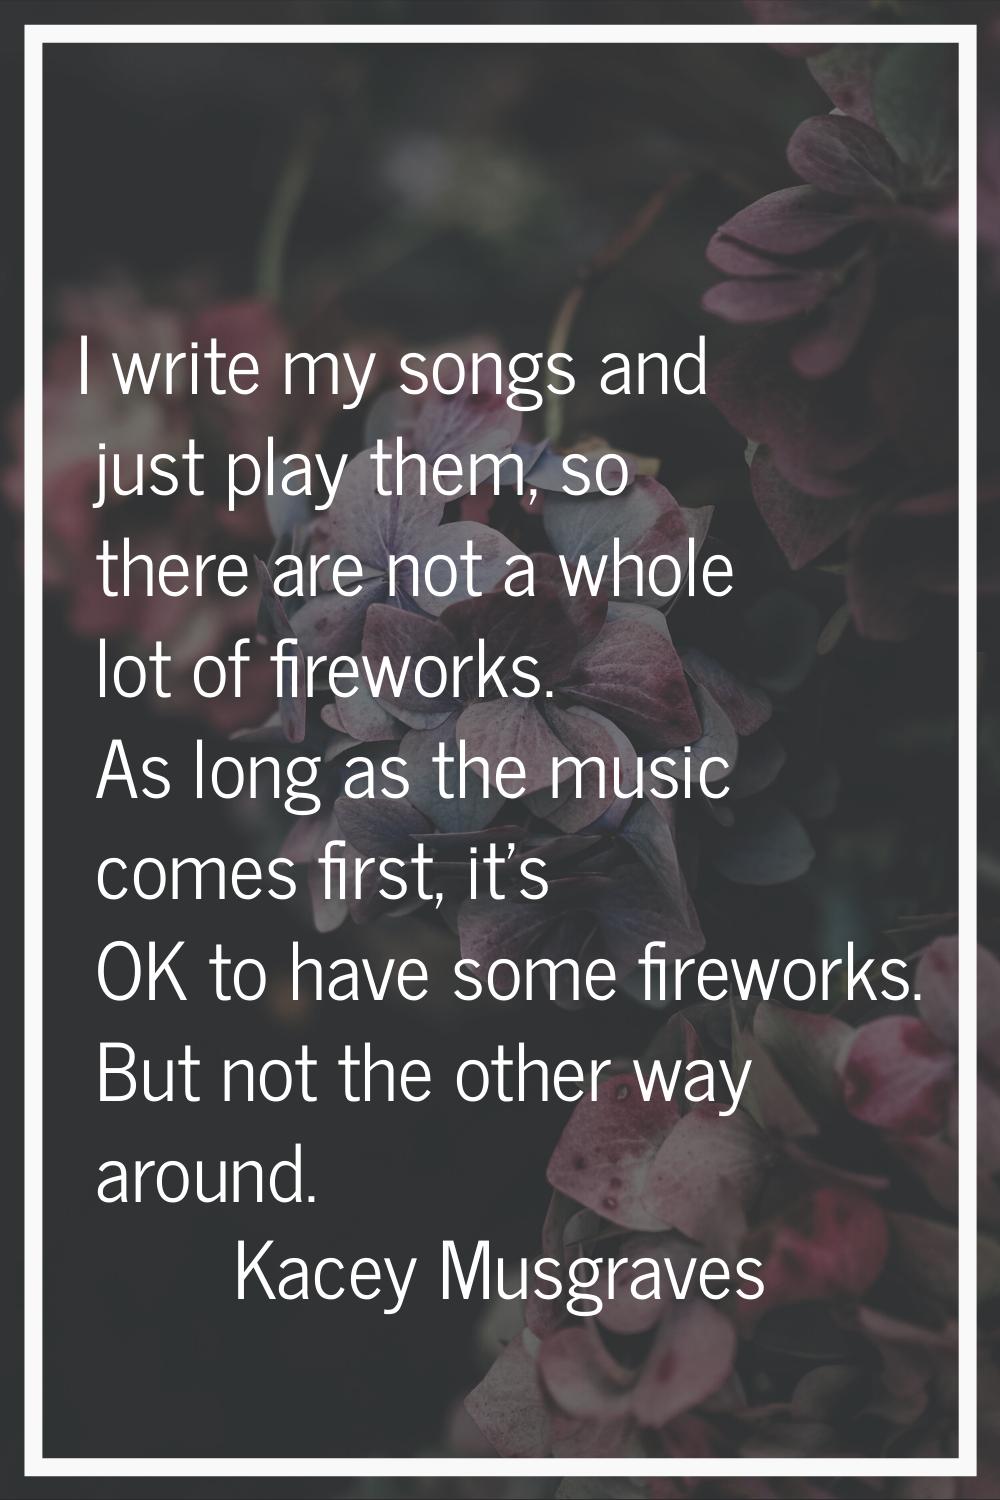 I write my songs and just play them, so there are not a whole lot of fireworks. As long as the musi